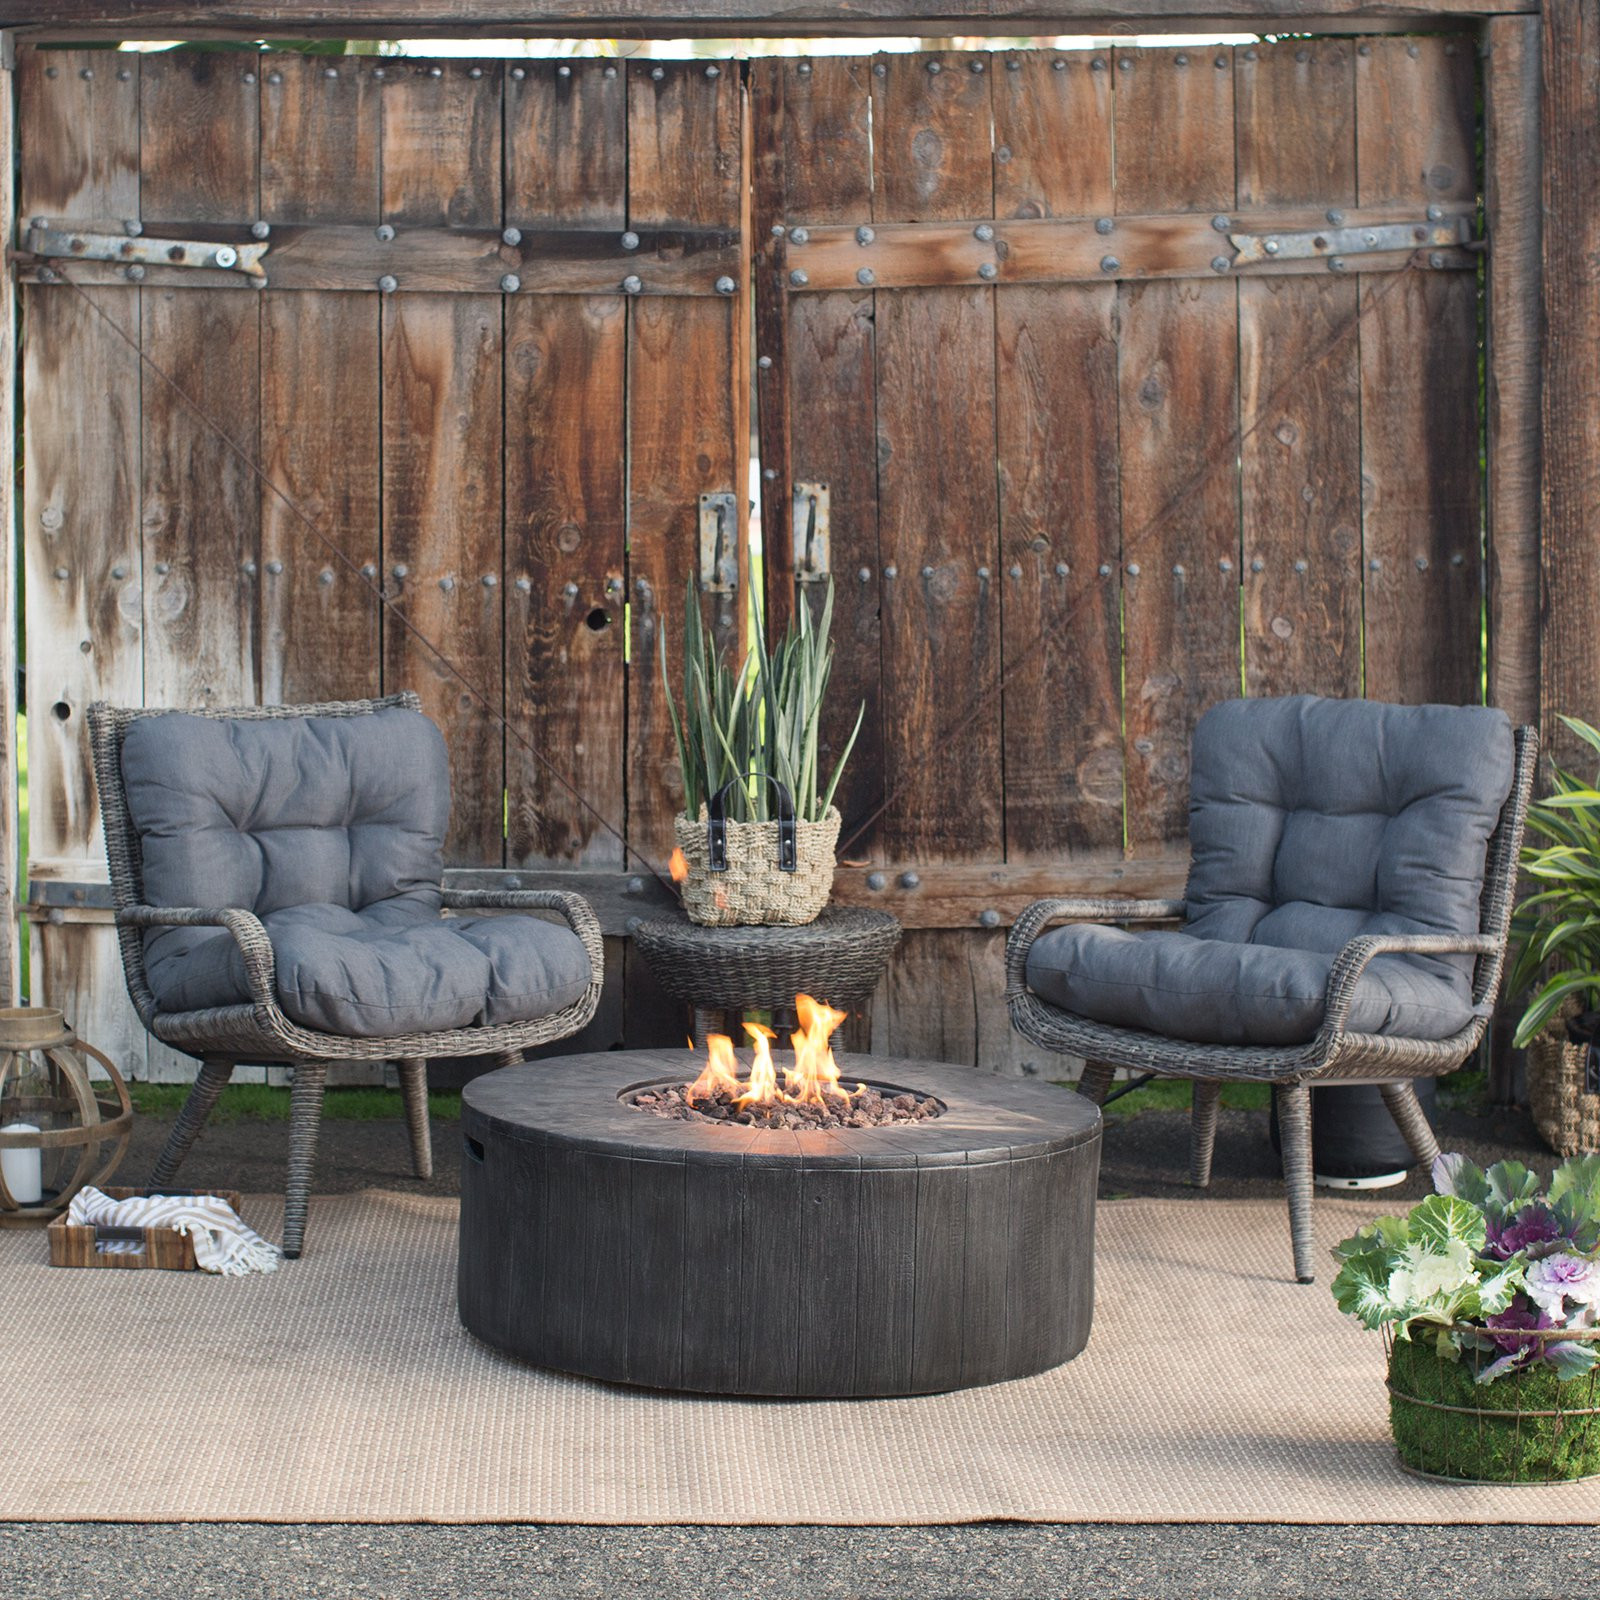 Patio Sets With Fire Pit
 Belham Living Rio Wicker Chat Set with Whitehall Gas Fire